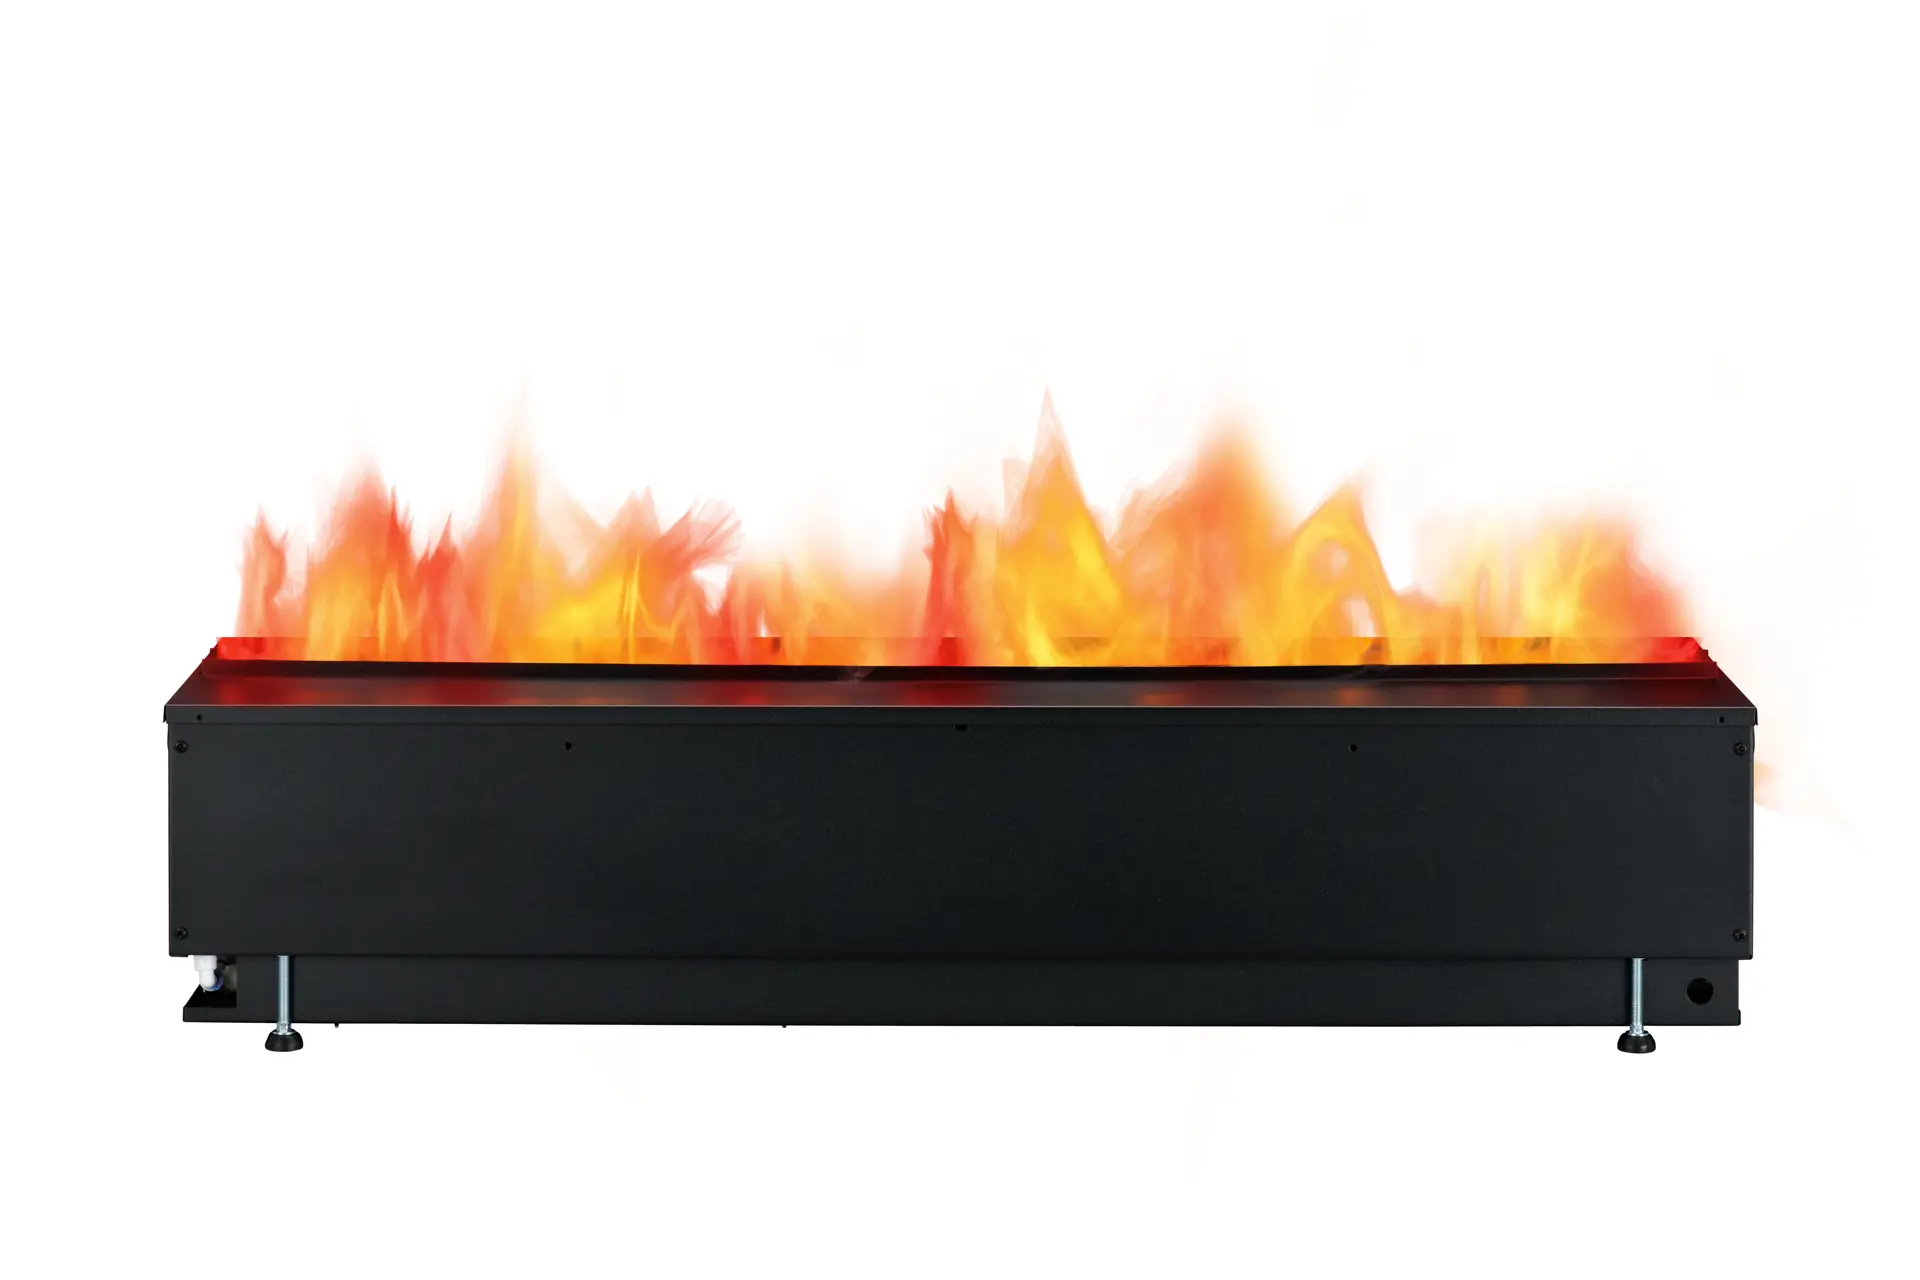 Dimplex_Cassette 1000 projects_400001275_Front Natural Flame.jpg